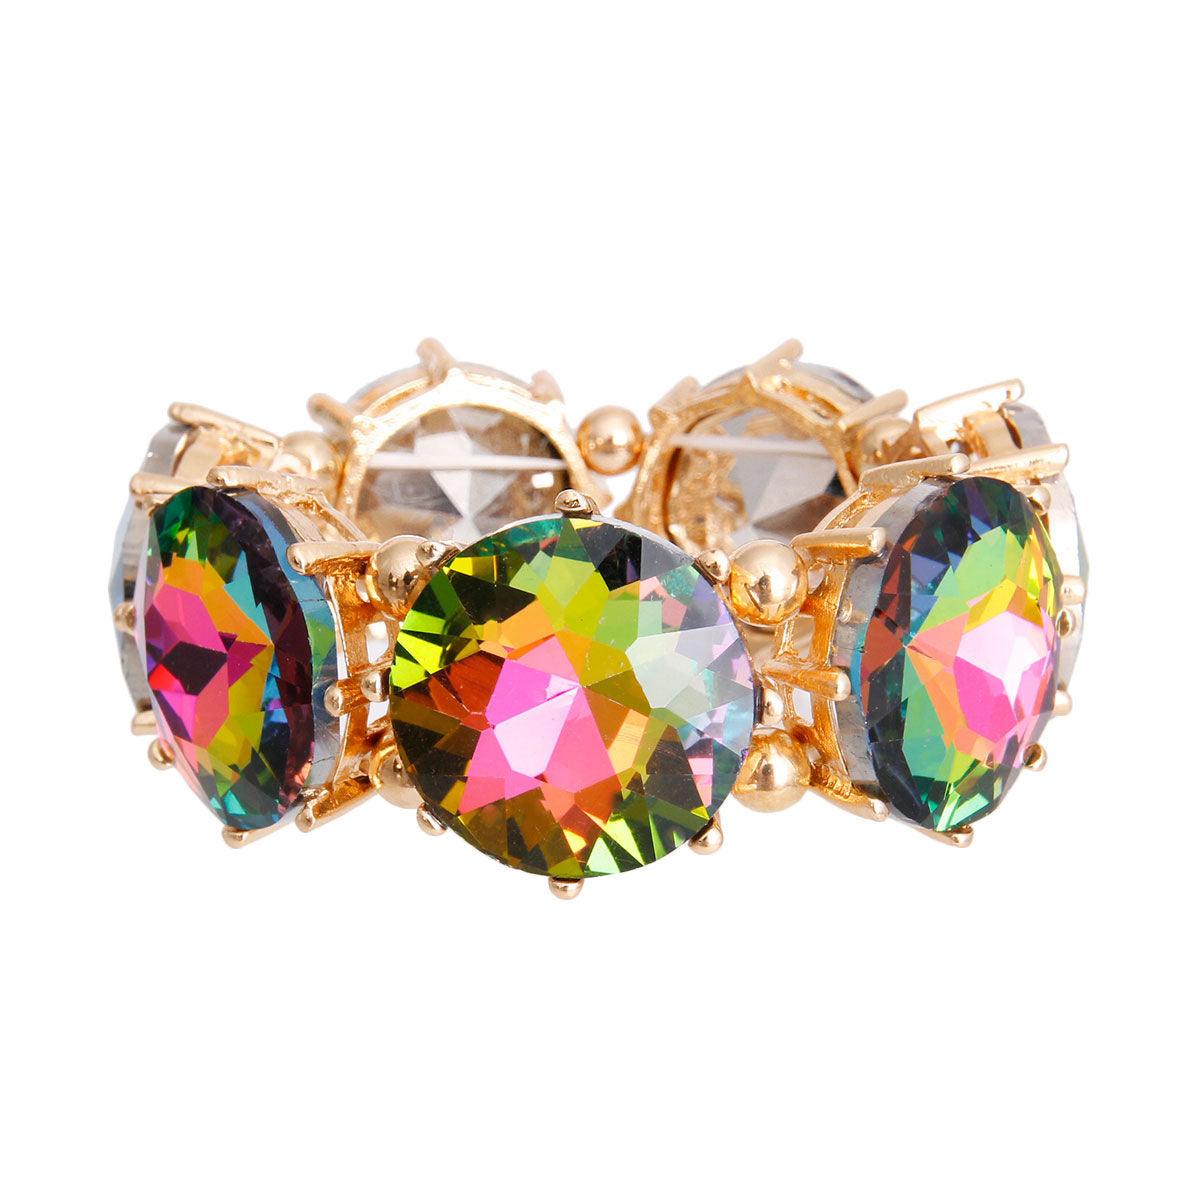 Boldly Chic Pink & Green Crystal Bracelet - Look Stunning Now